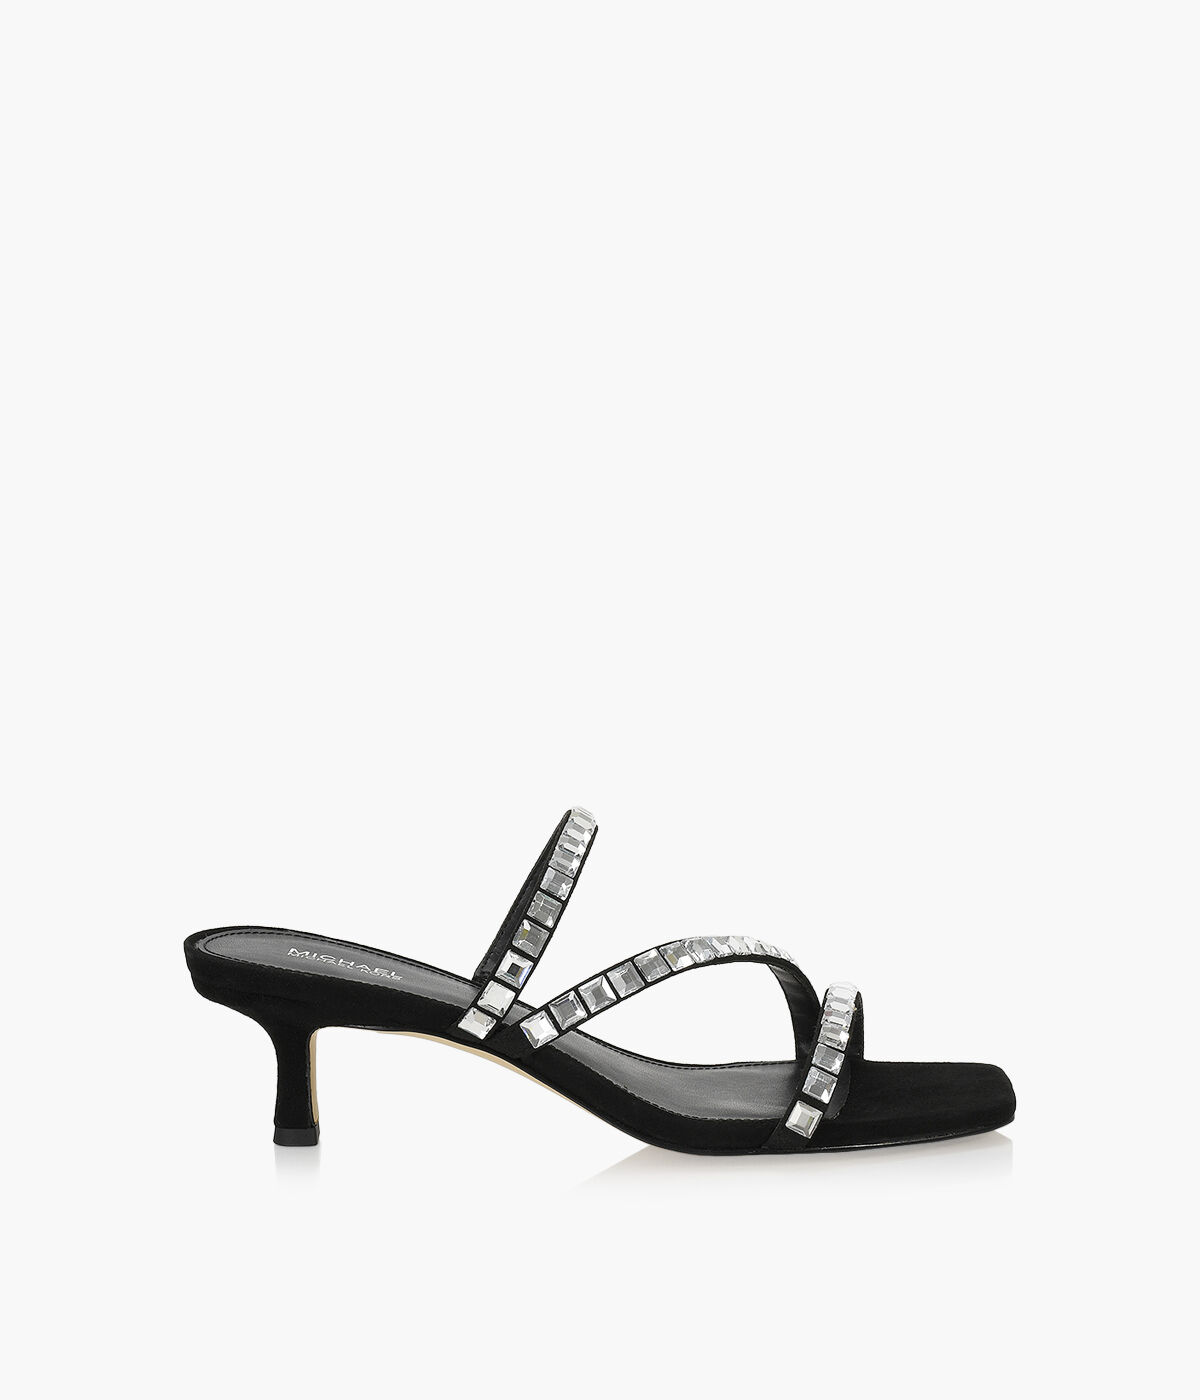 New Sandals for Women | Simons Canada